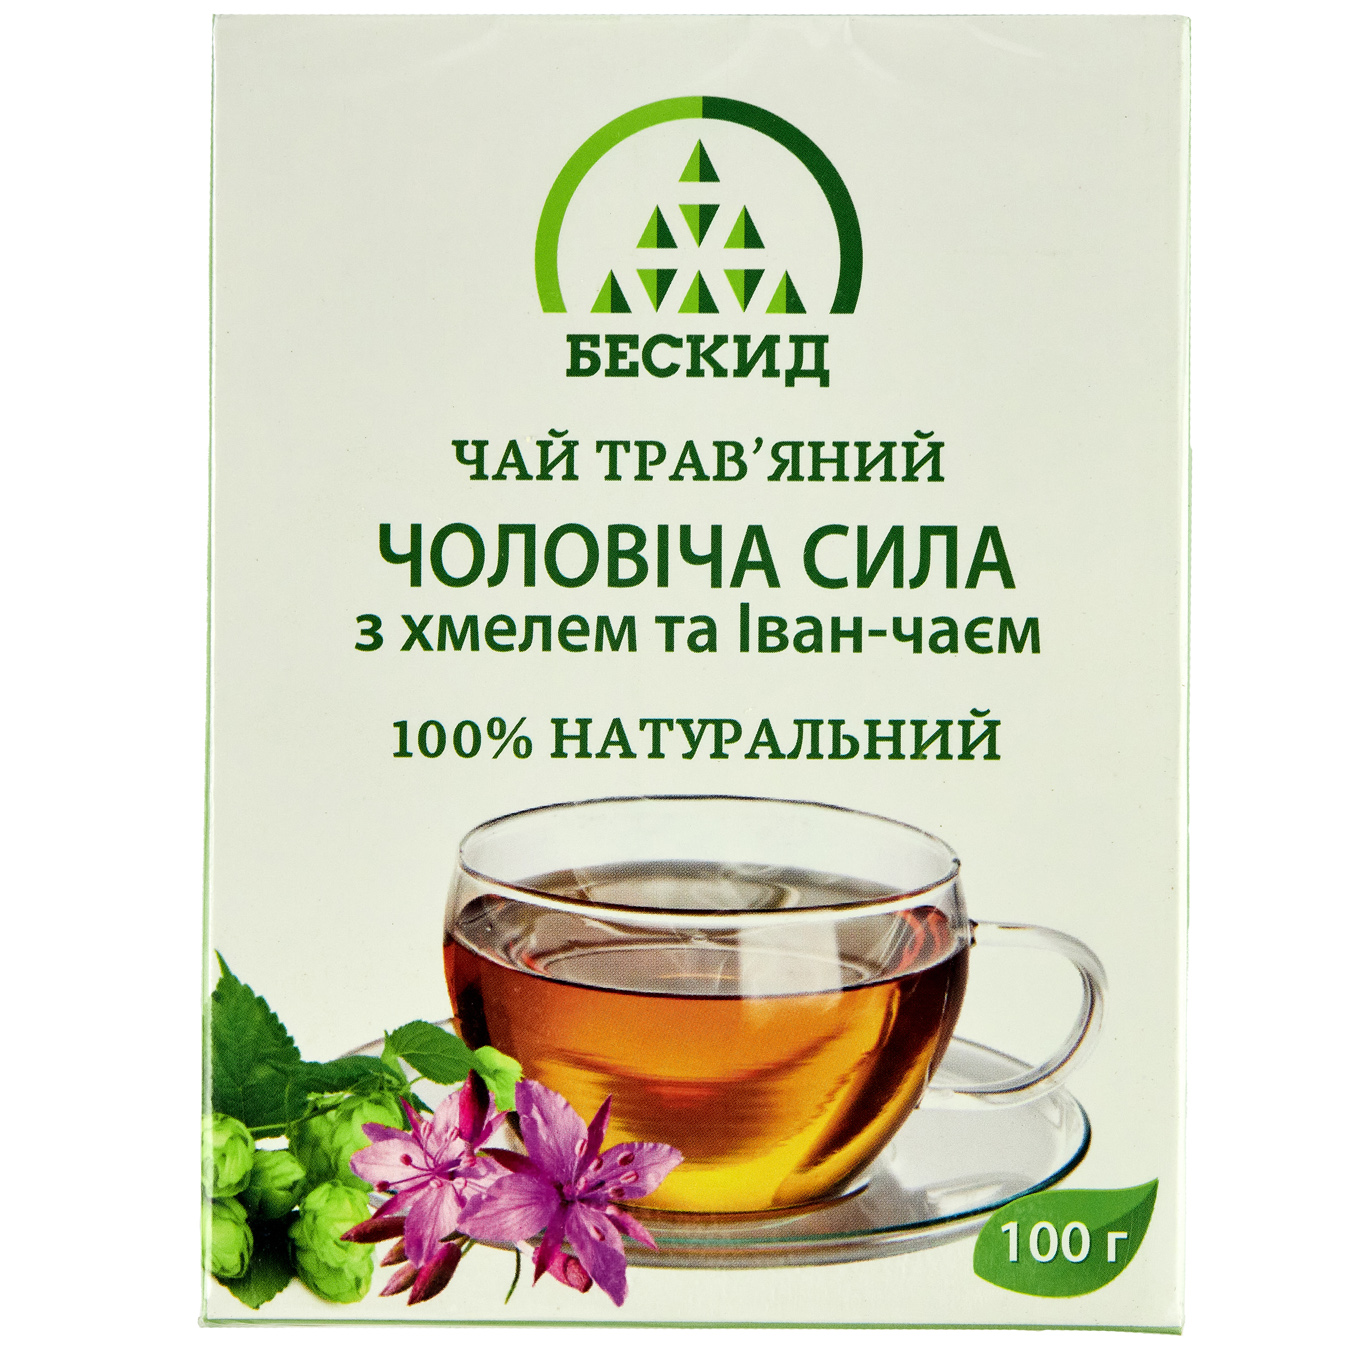 Beskyd Male Power Herbal Tea with Hops and Blooming Sally 100g